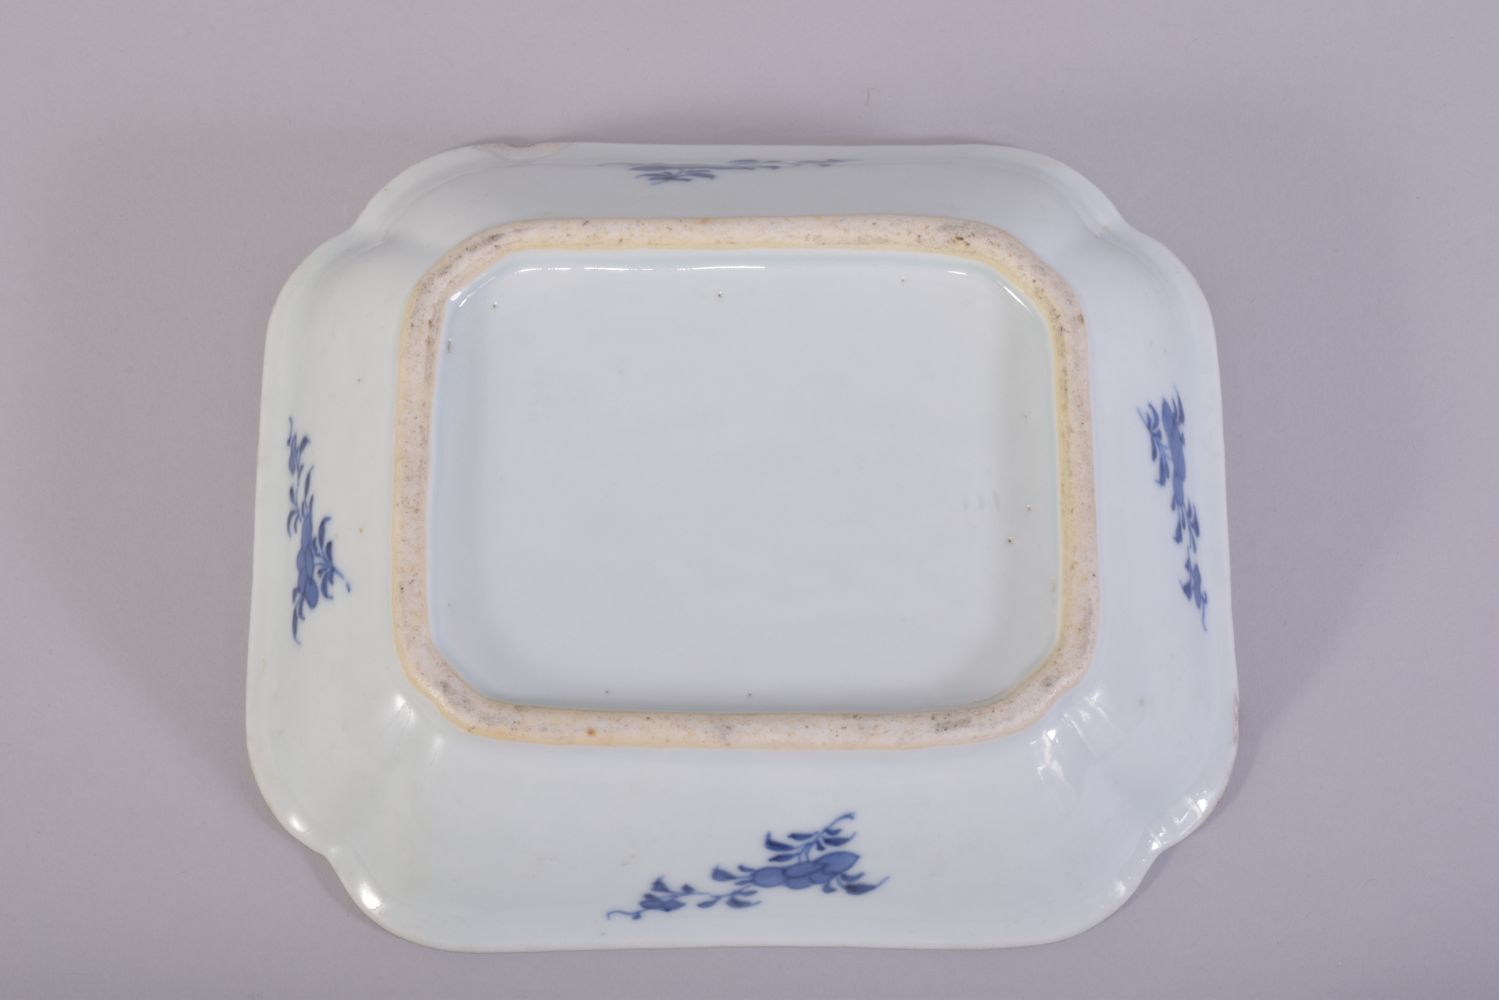 A CHINESE BLUE AND WHITE PORCELAIN TUREEN AND COVER, decorated with landscape scenes of buildings - Image 8 of 8